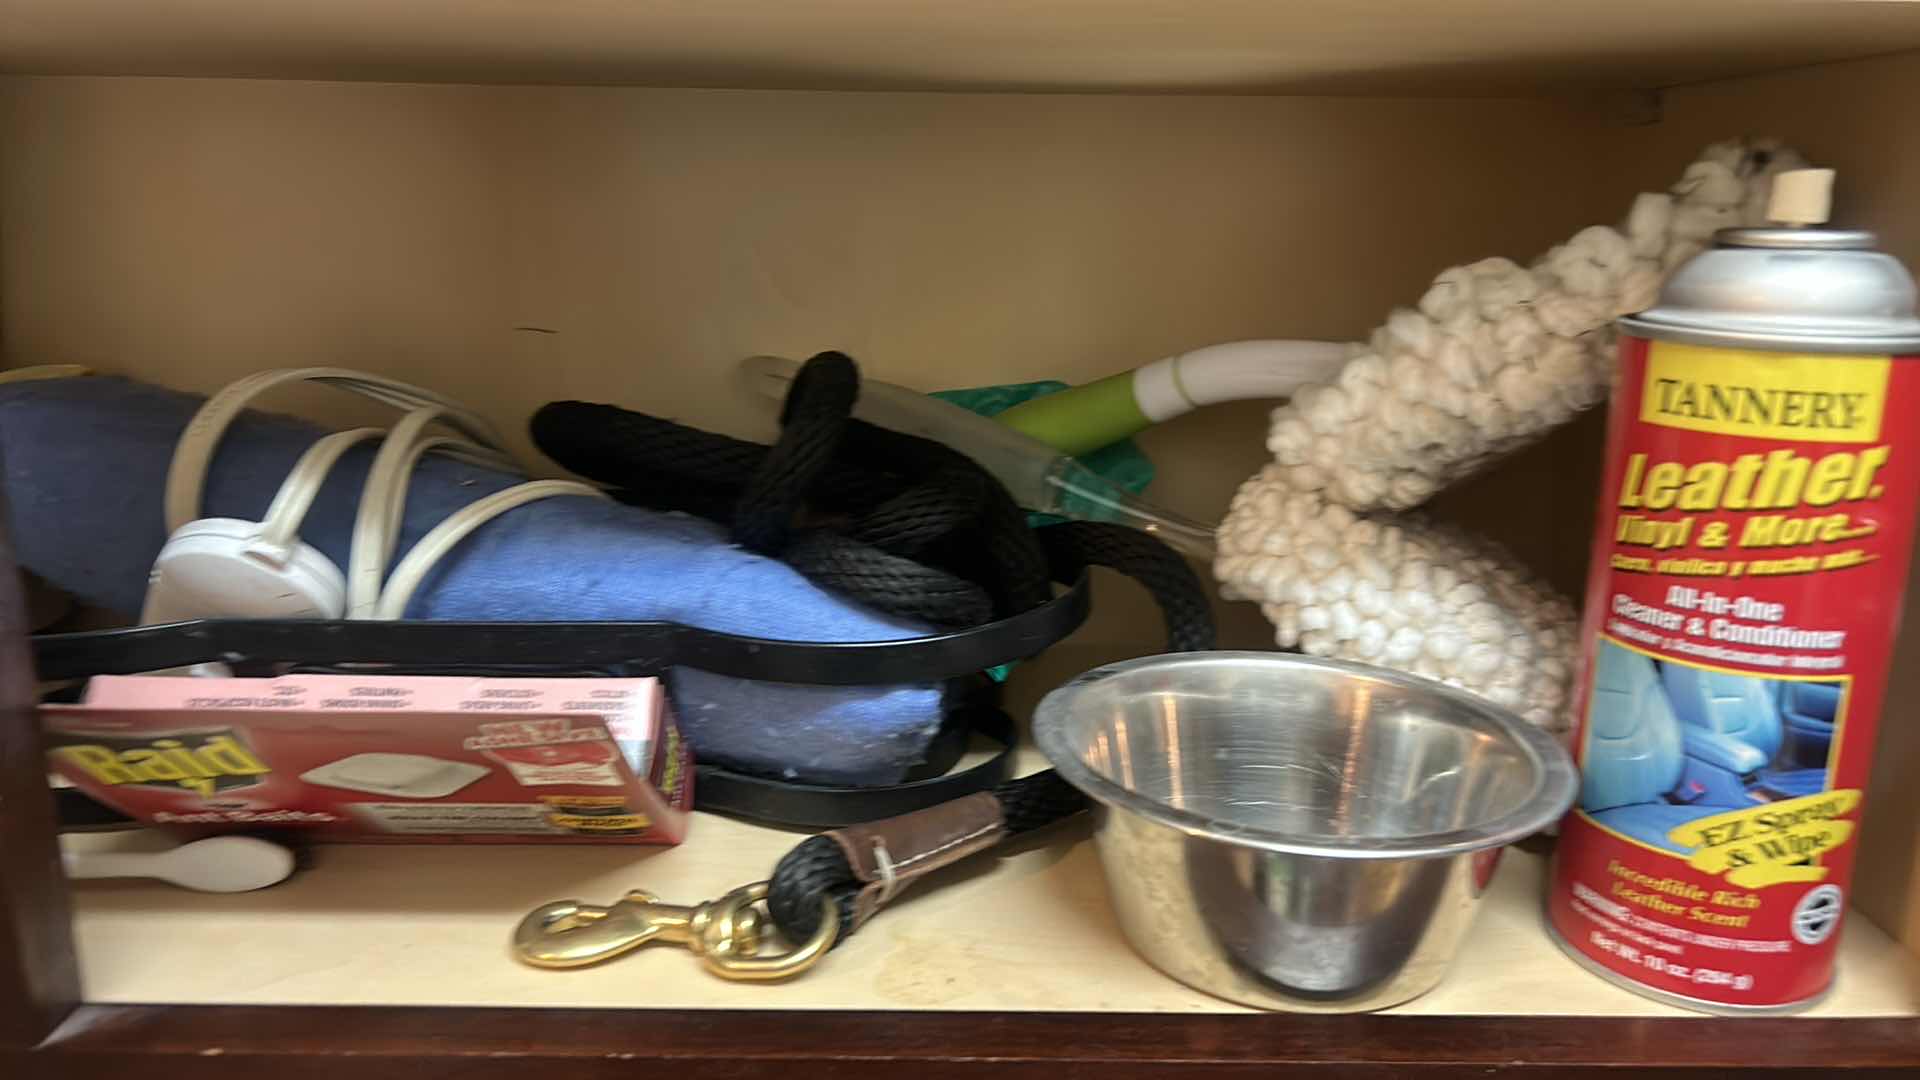 Photo 6 of CONTENTS OF CABINET IN LAUNDRY ROOM